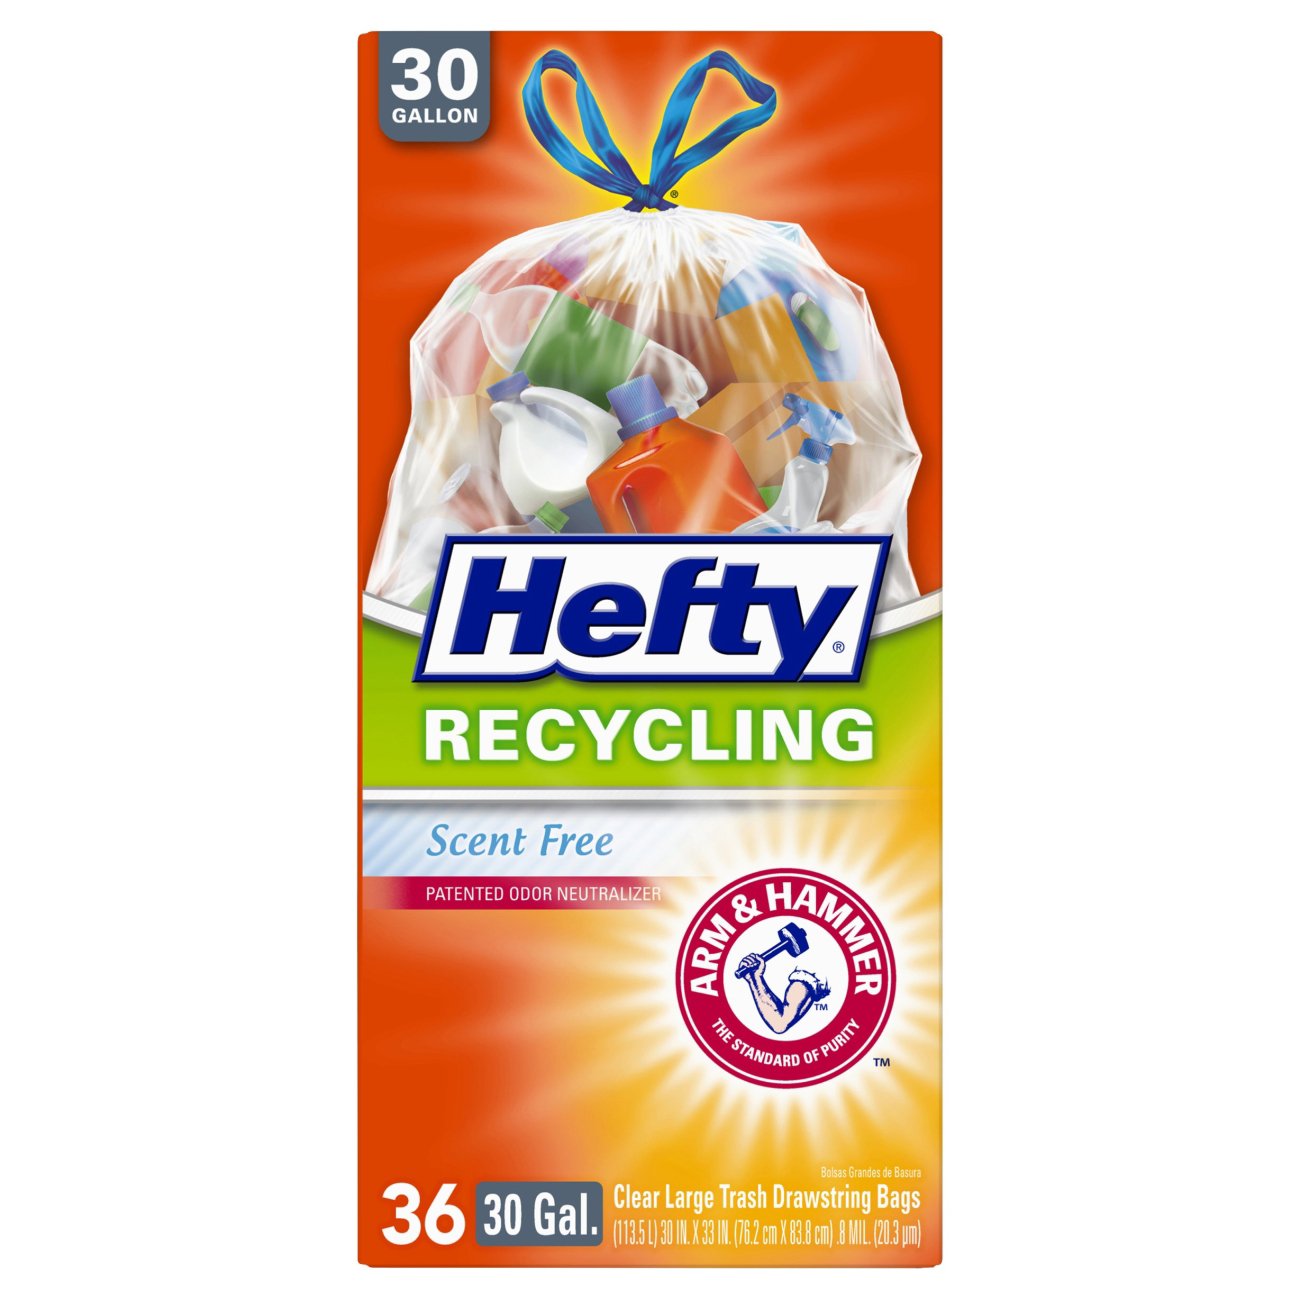 Field & Future by H-E-B Clear 30-Gallon Bags for Recyclables